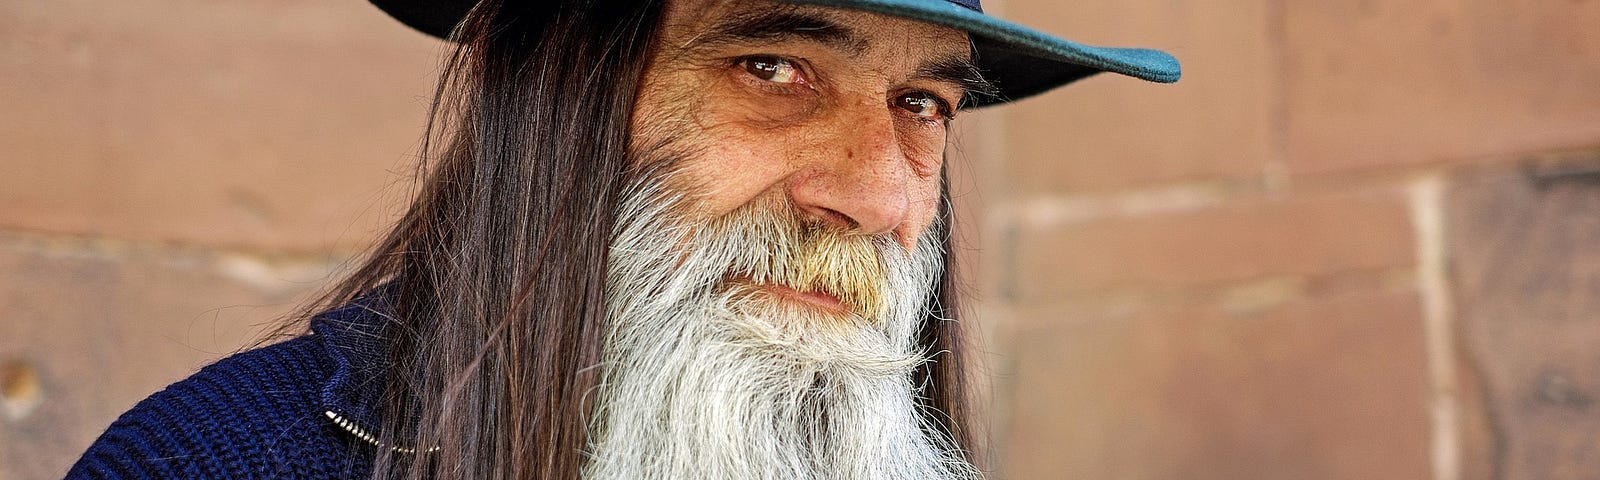 Happy older man with long white beard and long brown hair wearing a teal hat.